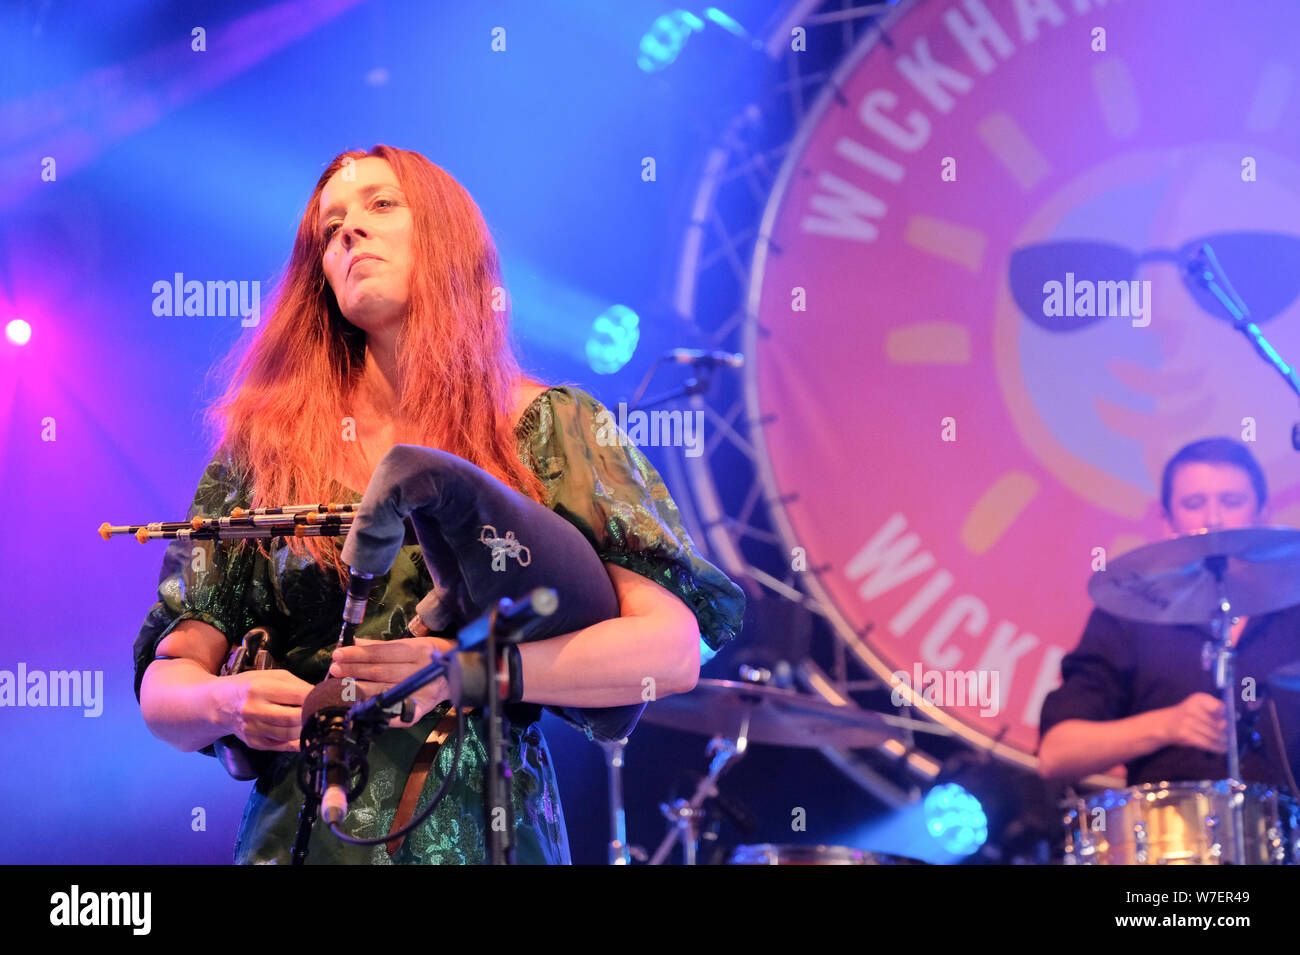 Kathryn Tickell and The Darkening performing at  The Wickham Festival, Wickham, UK. August 2, 2019 Stock Photo